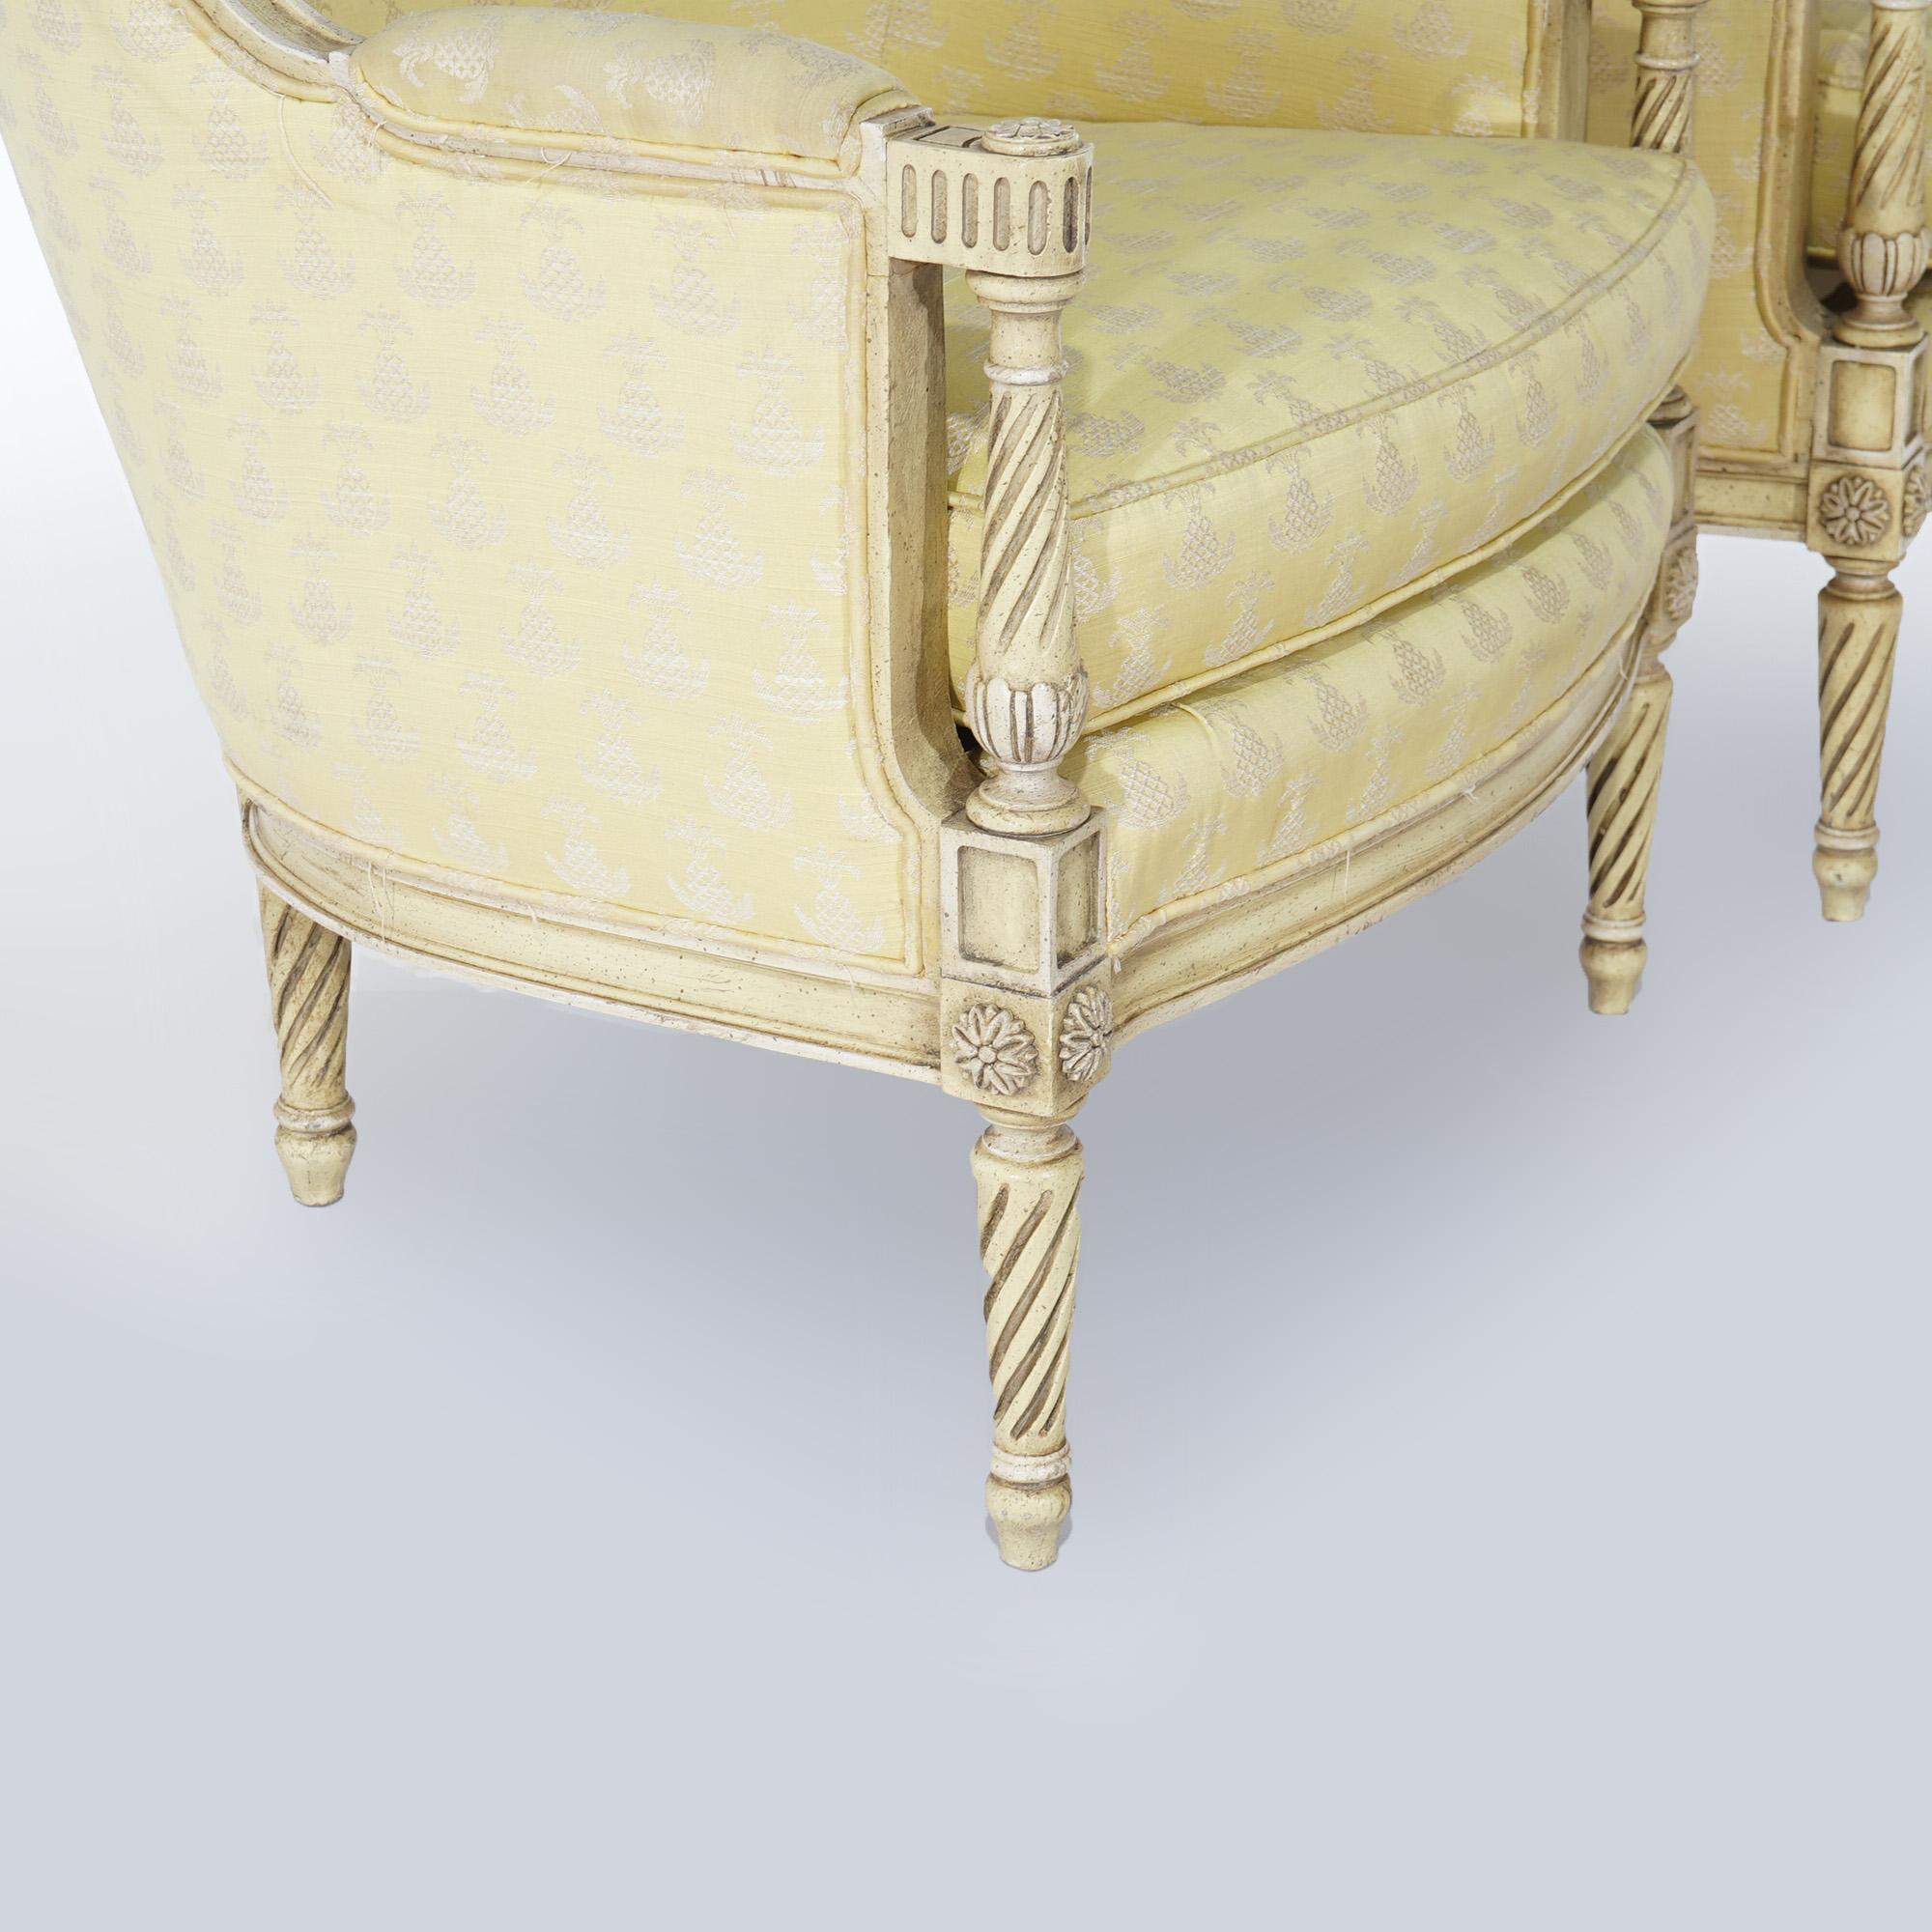 A pair of French Louis XVI style bergere chairs by Hibriten-Bernhardt offer curved form with upholstered throughout, carved rope twist arms and raised on turned and tapered legs with rosette capitals, 20thC

Measures- 33.5''H x 26.5''W x